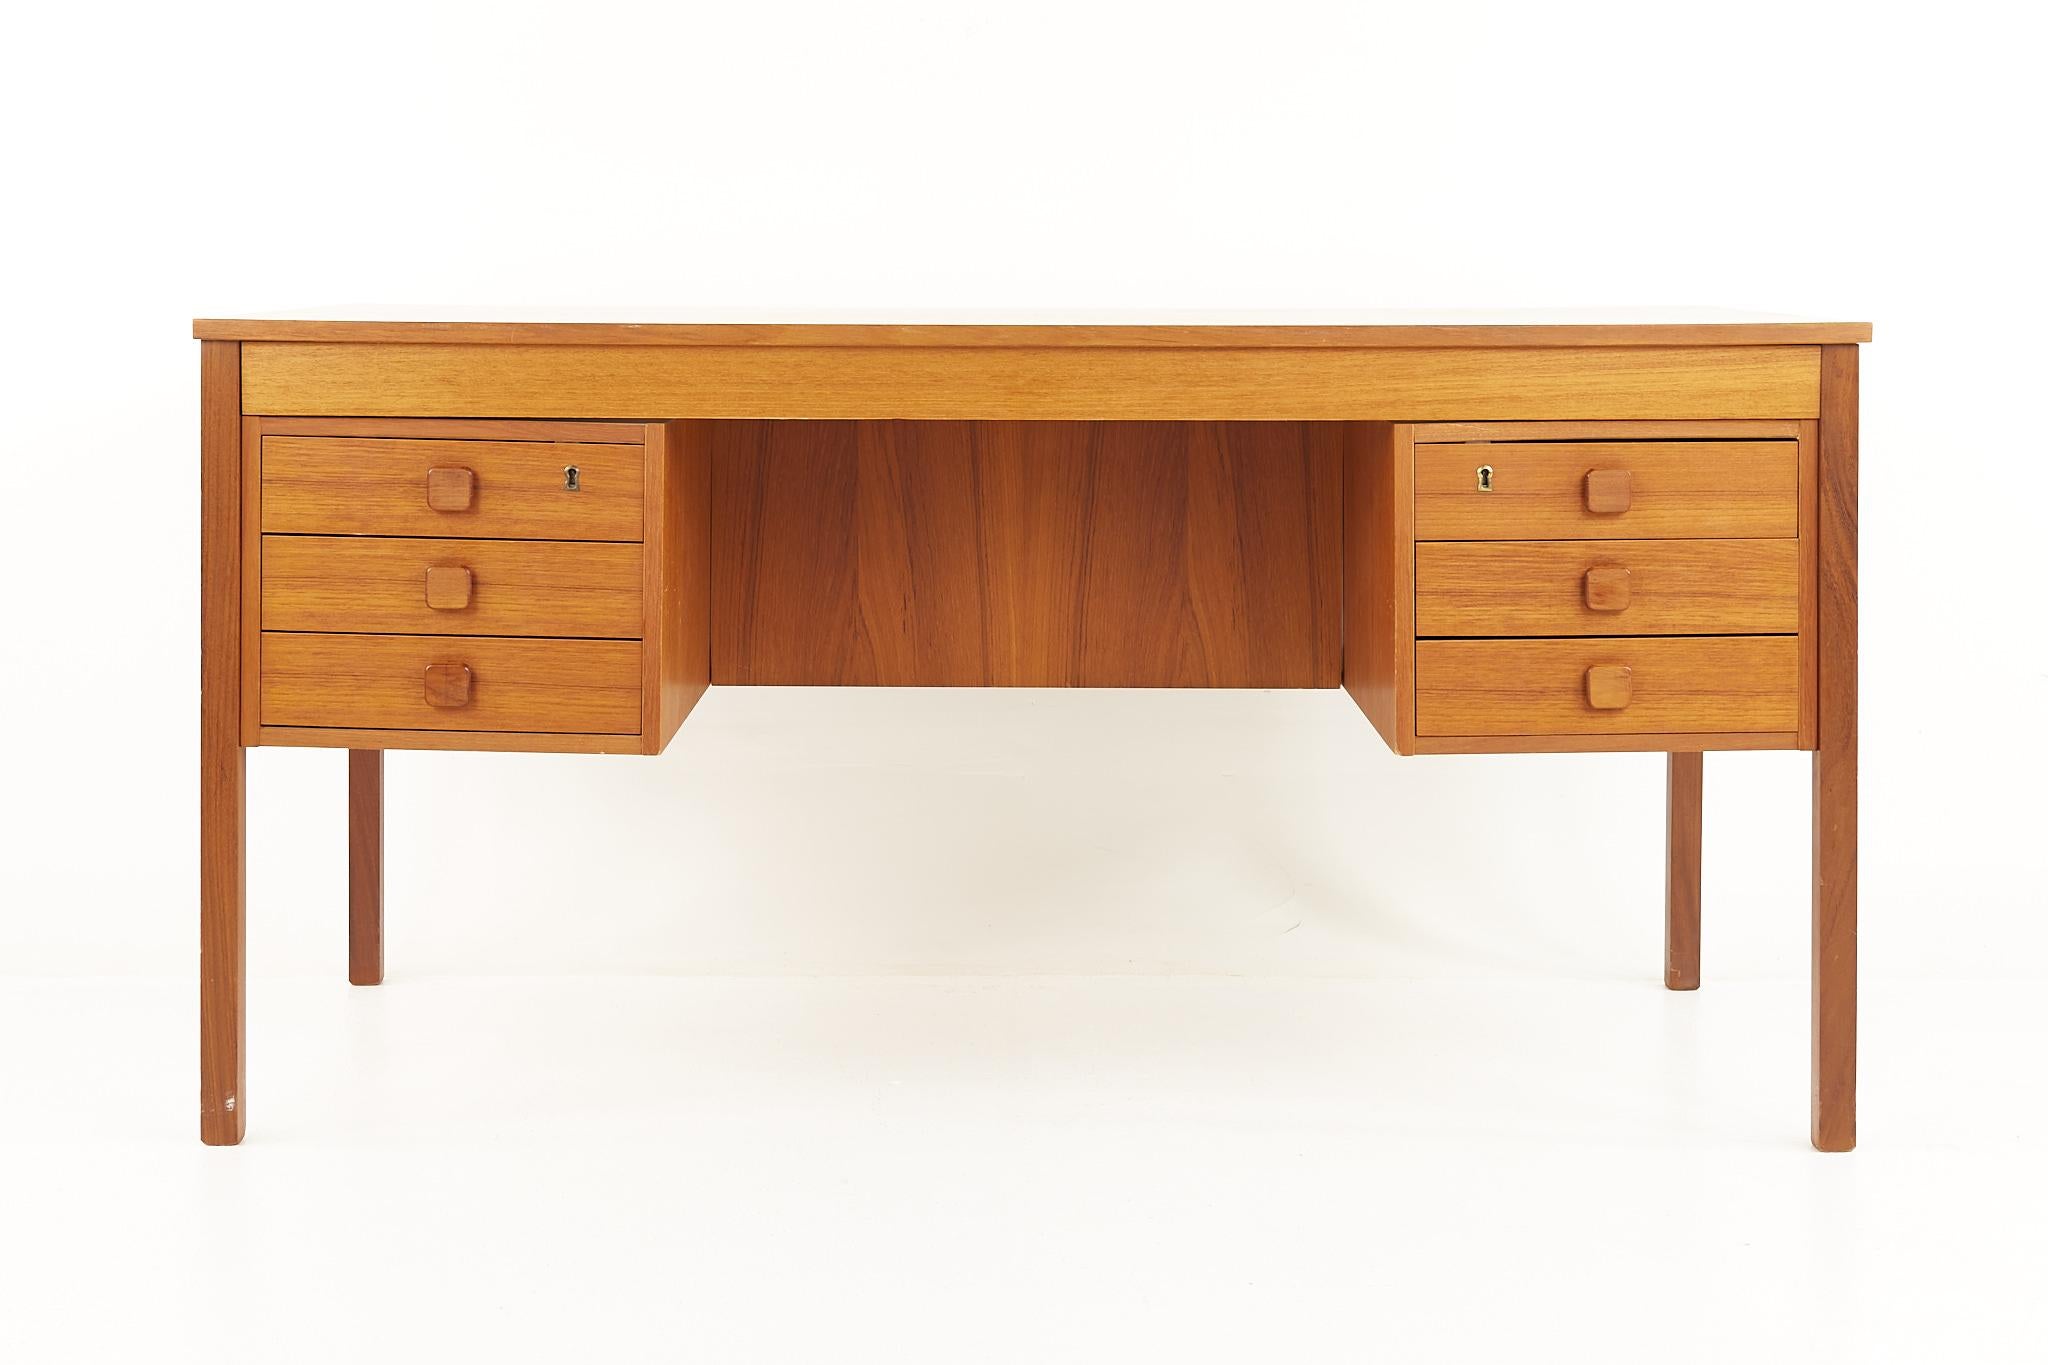 Domino Mobler mid century Danish teak desk

This desk measures: 57.25 wide x 27.75 deep x 28.75 inches high, with a chair clearance of 25.25 inches

All pieces of furniture can be had in what we call restored vintage condition. That means the